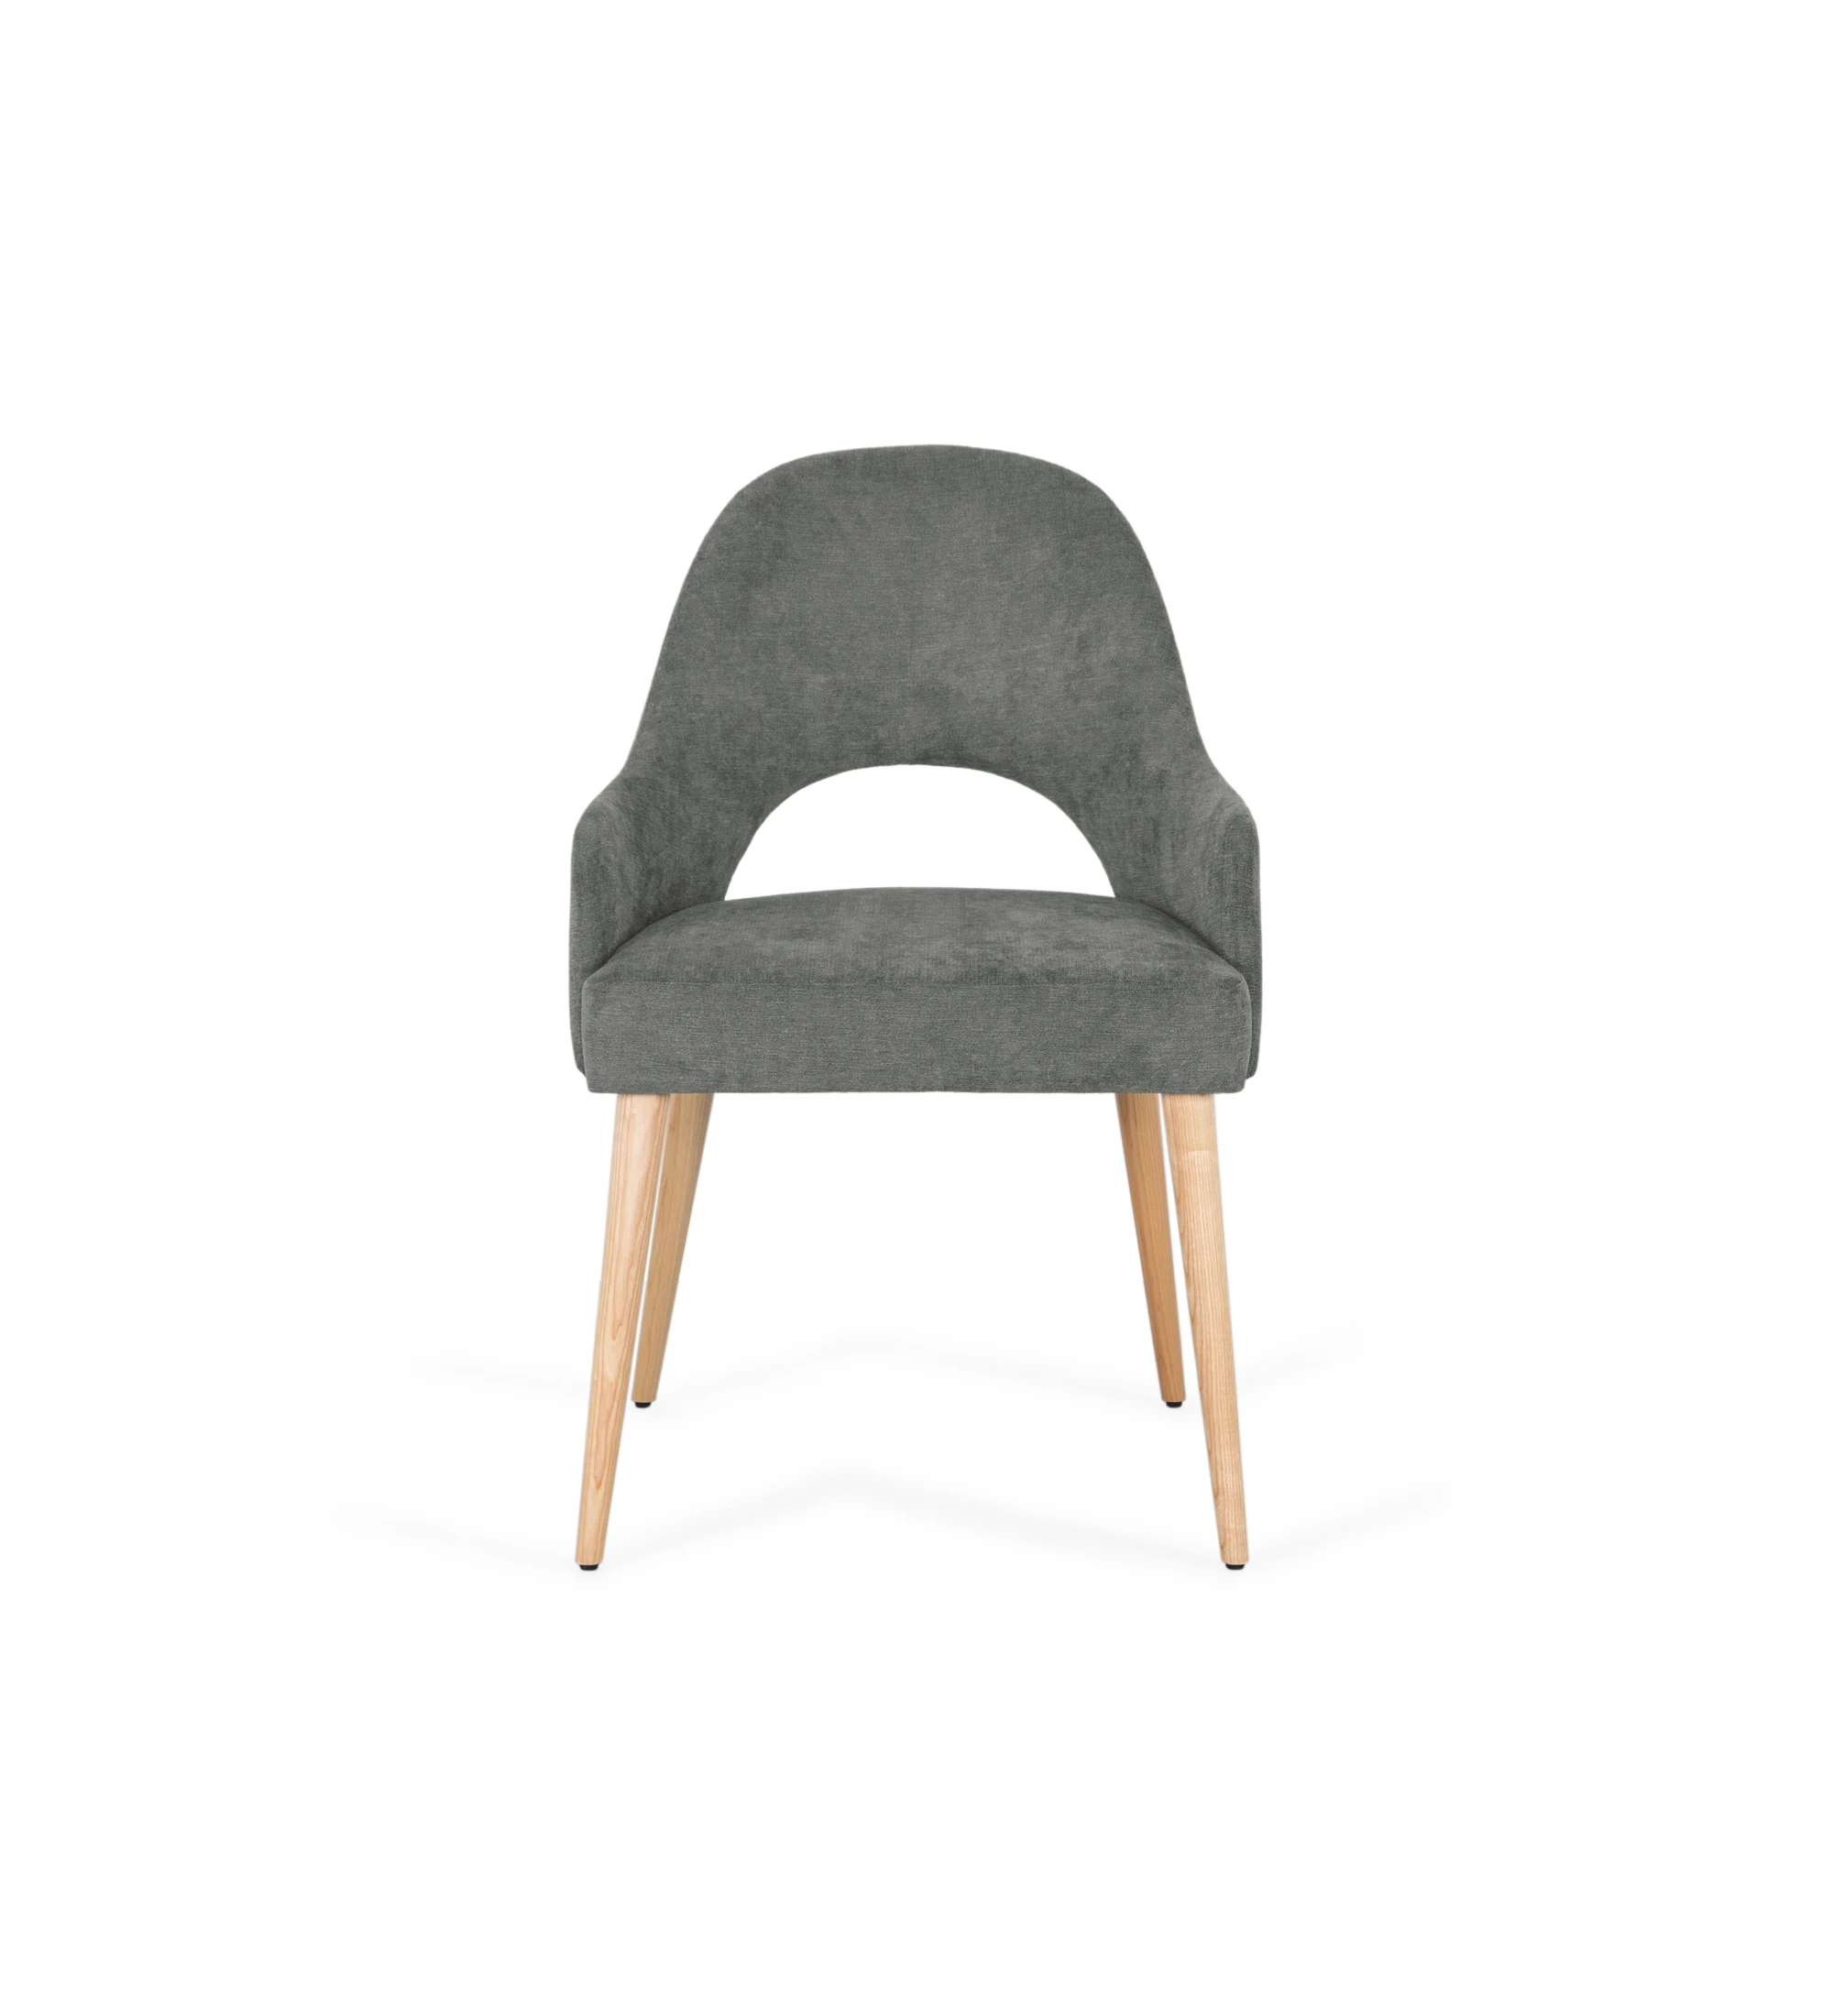 Paris chair with armrests, upholstered in green fabric, natural wood feet.